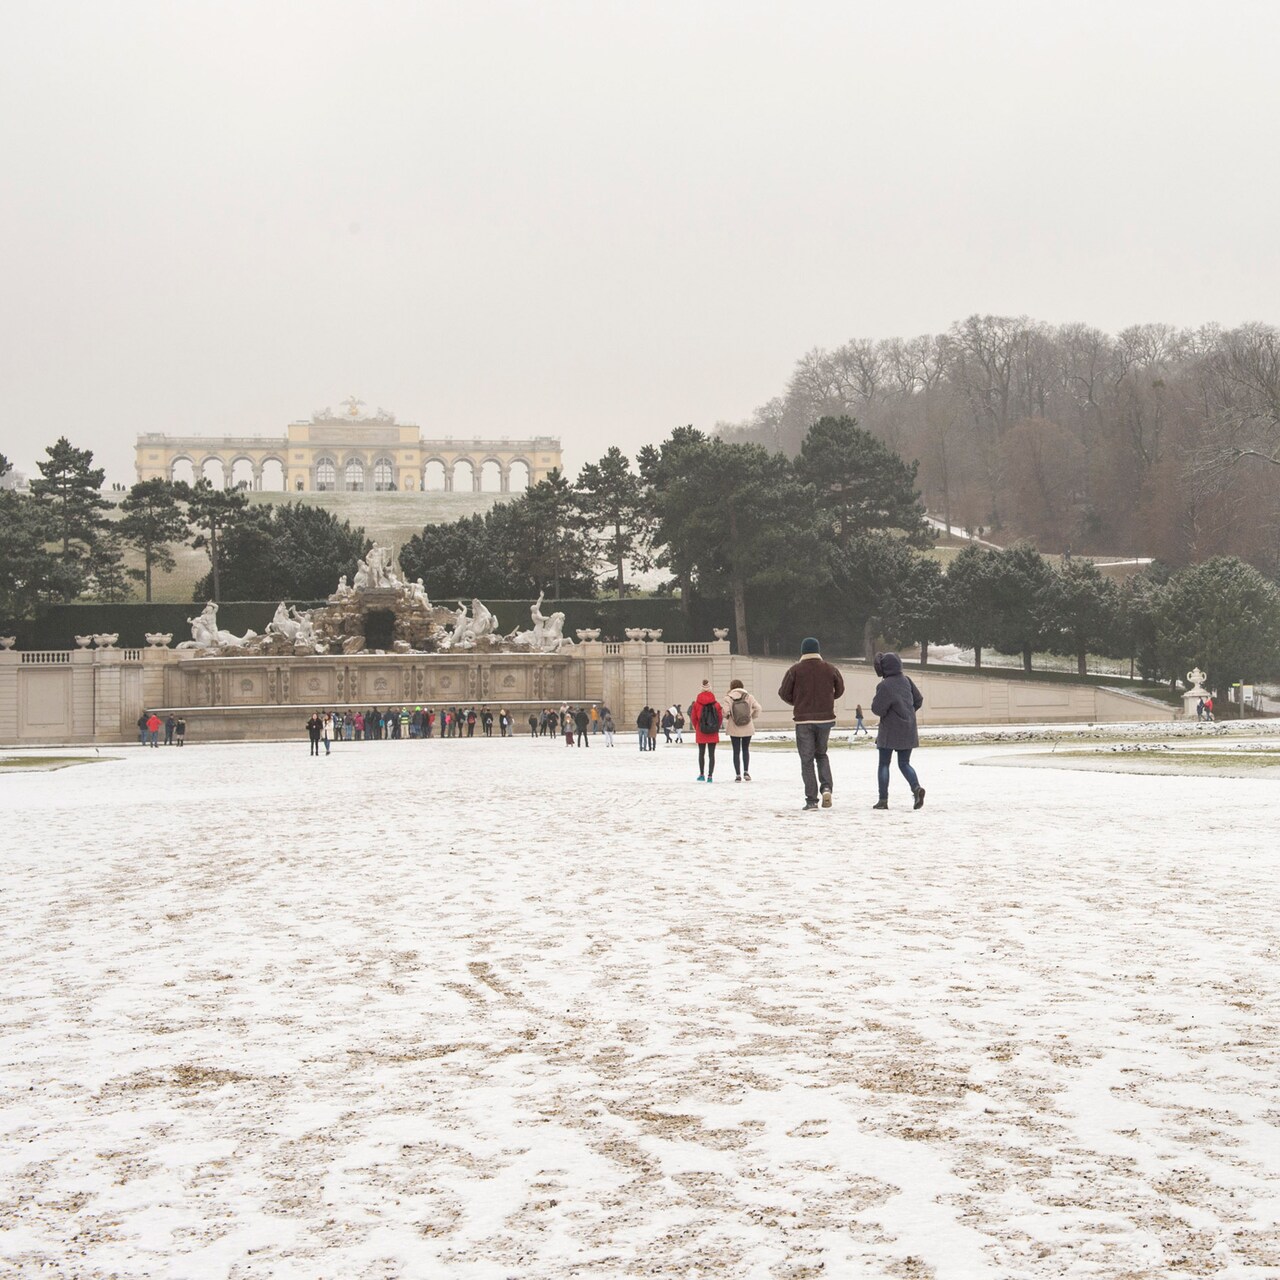 Groups of people walk along a snowy path towards Neptune Fountain at the foot of Schönbrunn Palace